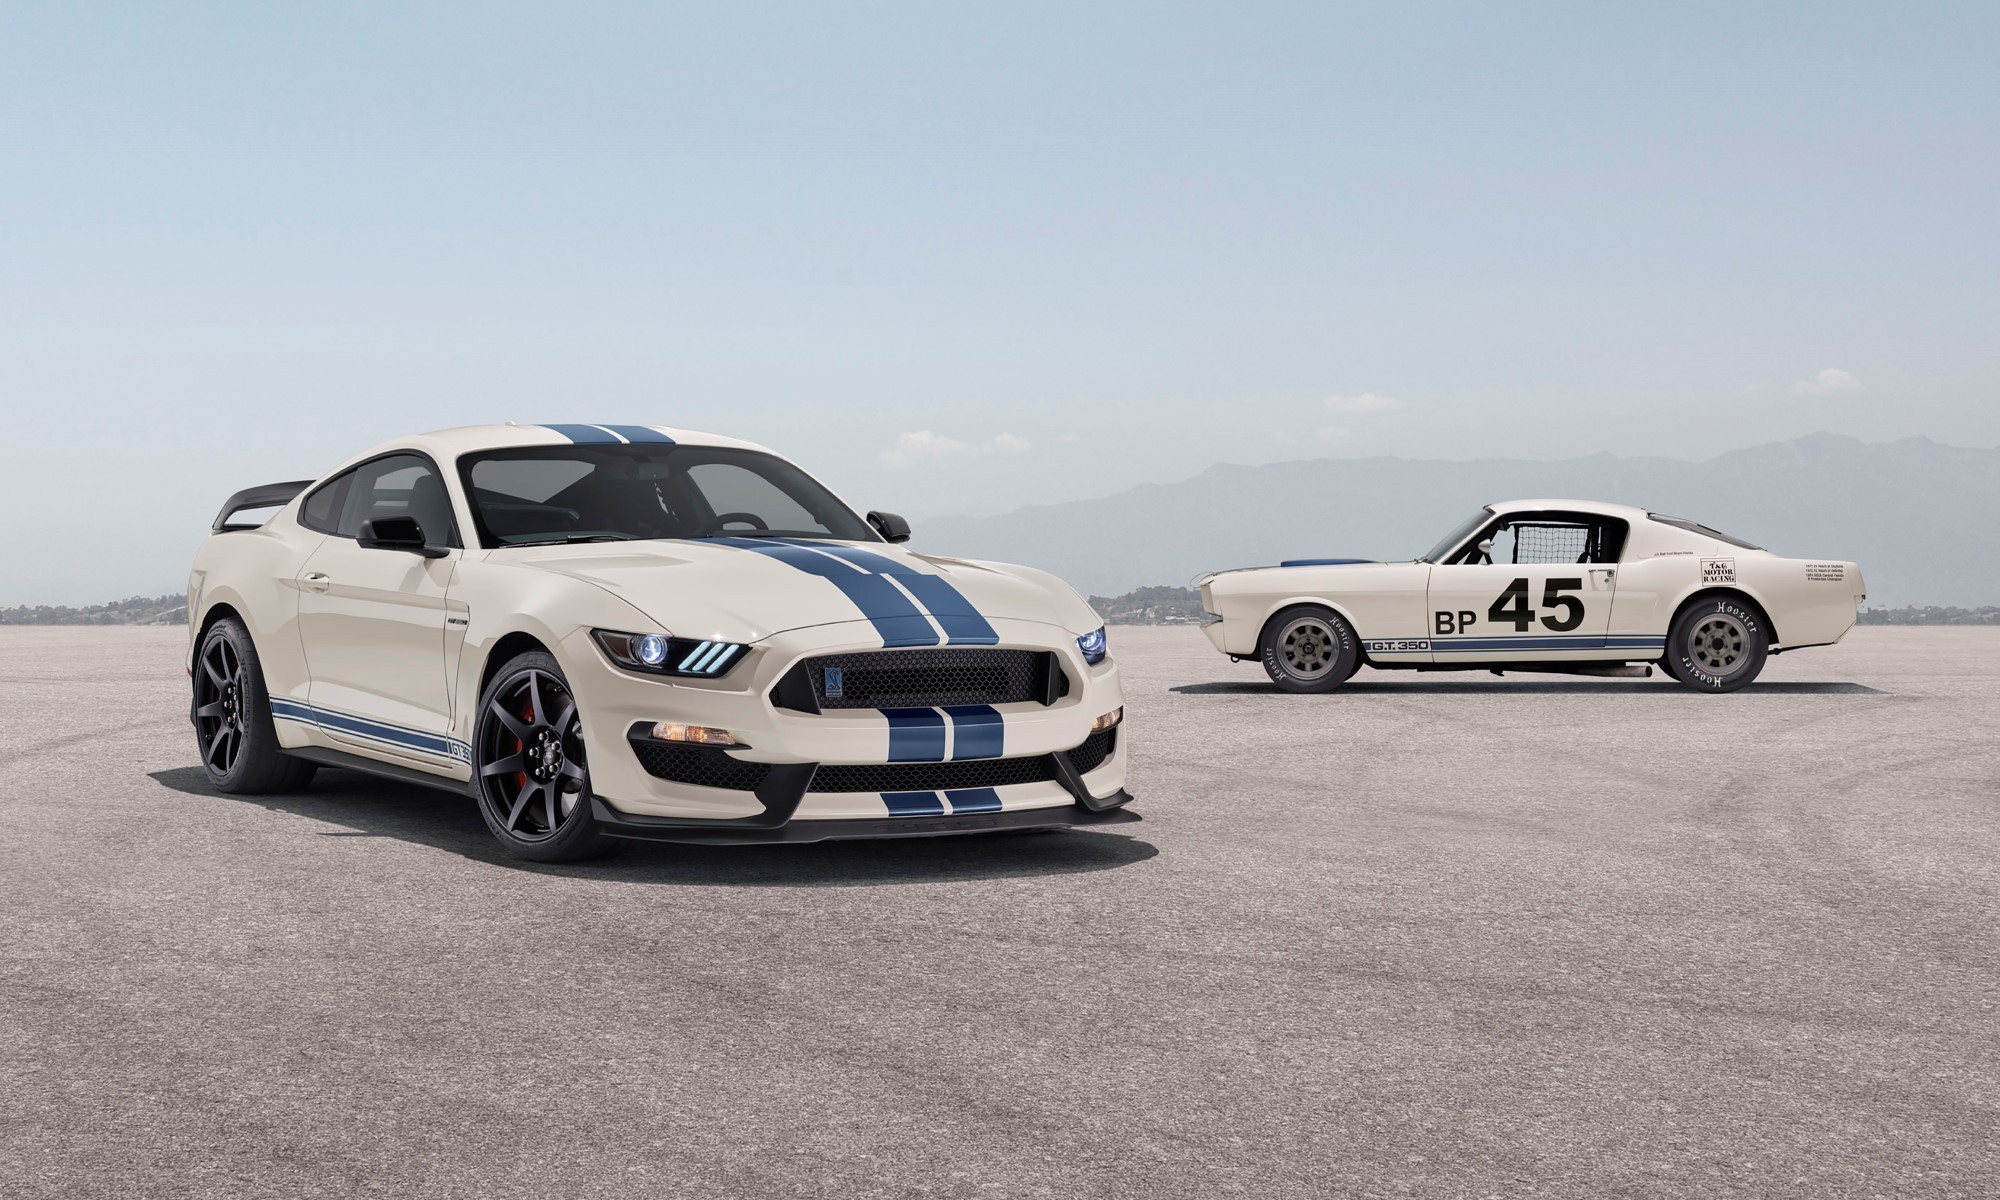 Mustang GT350 Heritage Edition and original 1965 car